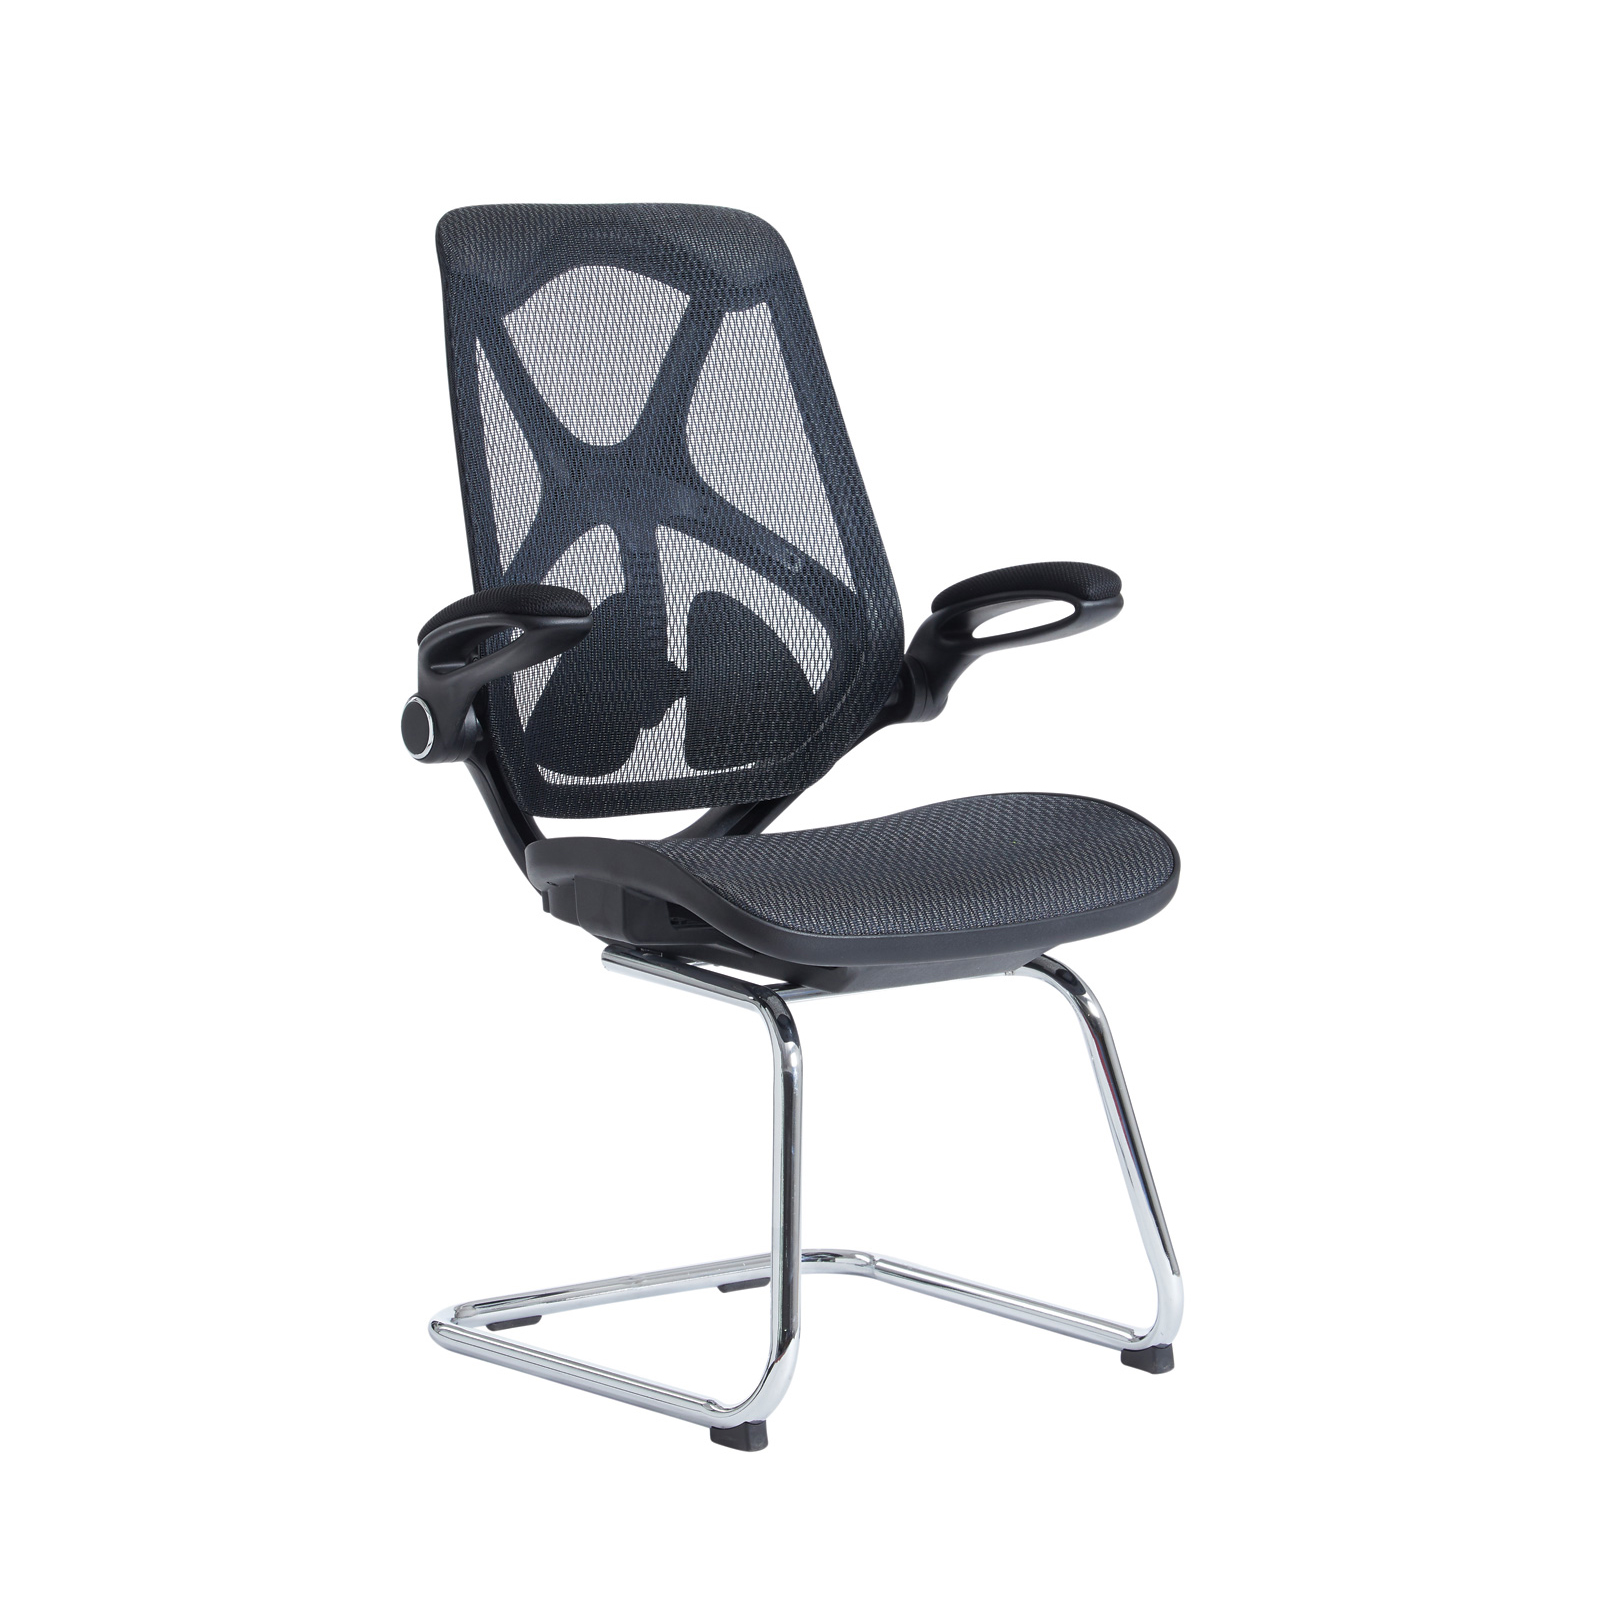 Napier high mesh back visitors chair with mesh seat - black